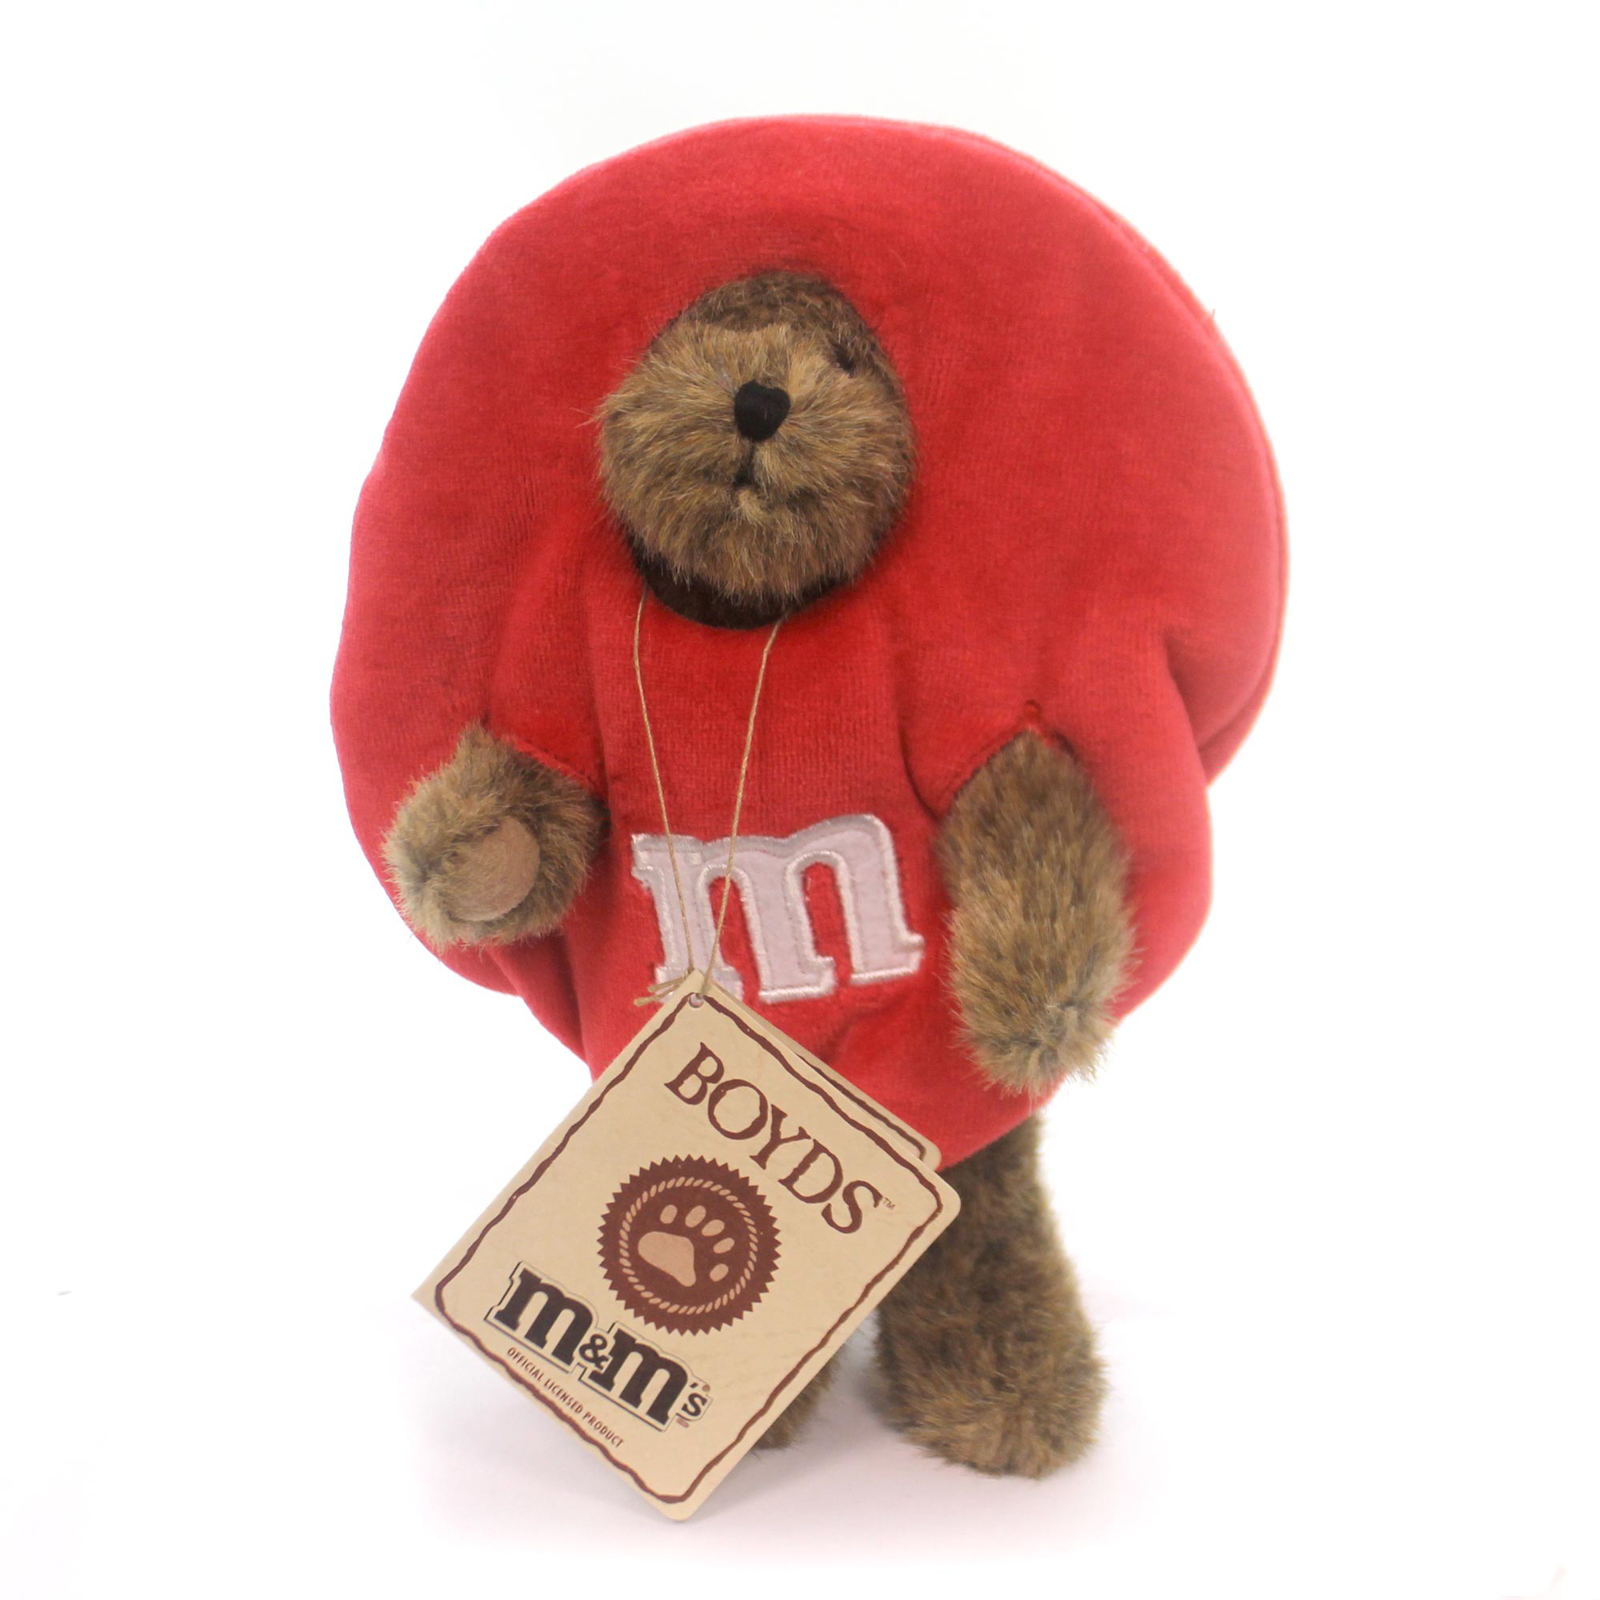 Boyds Candy Peekers are Beary special! The Candy Peekers are adorable Plush Teddy Bears dressed as M & M Characters. These fantastic Bears have a lot of character as the M & M guys. They won't melt in your hands!